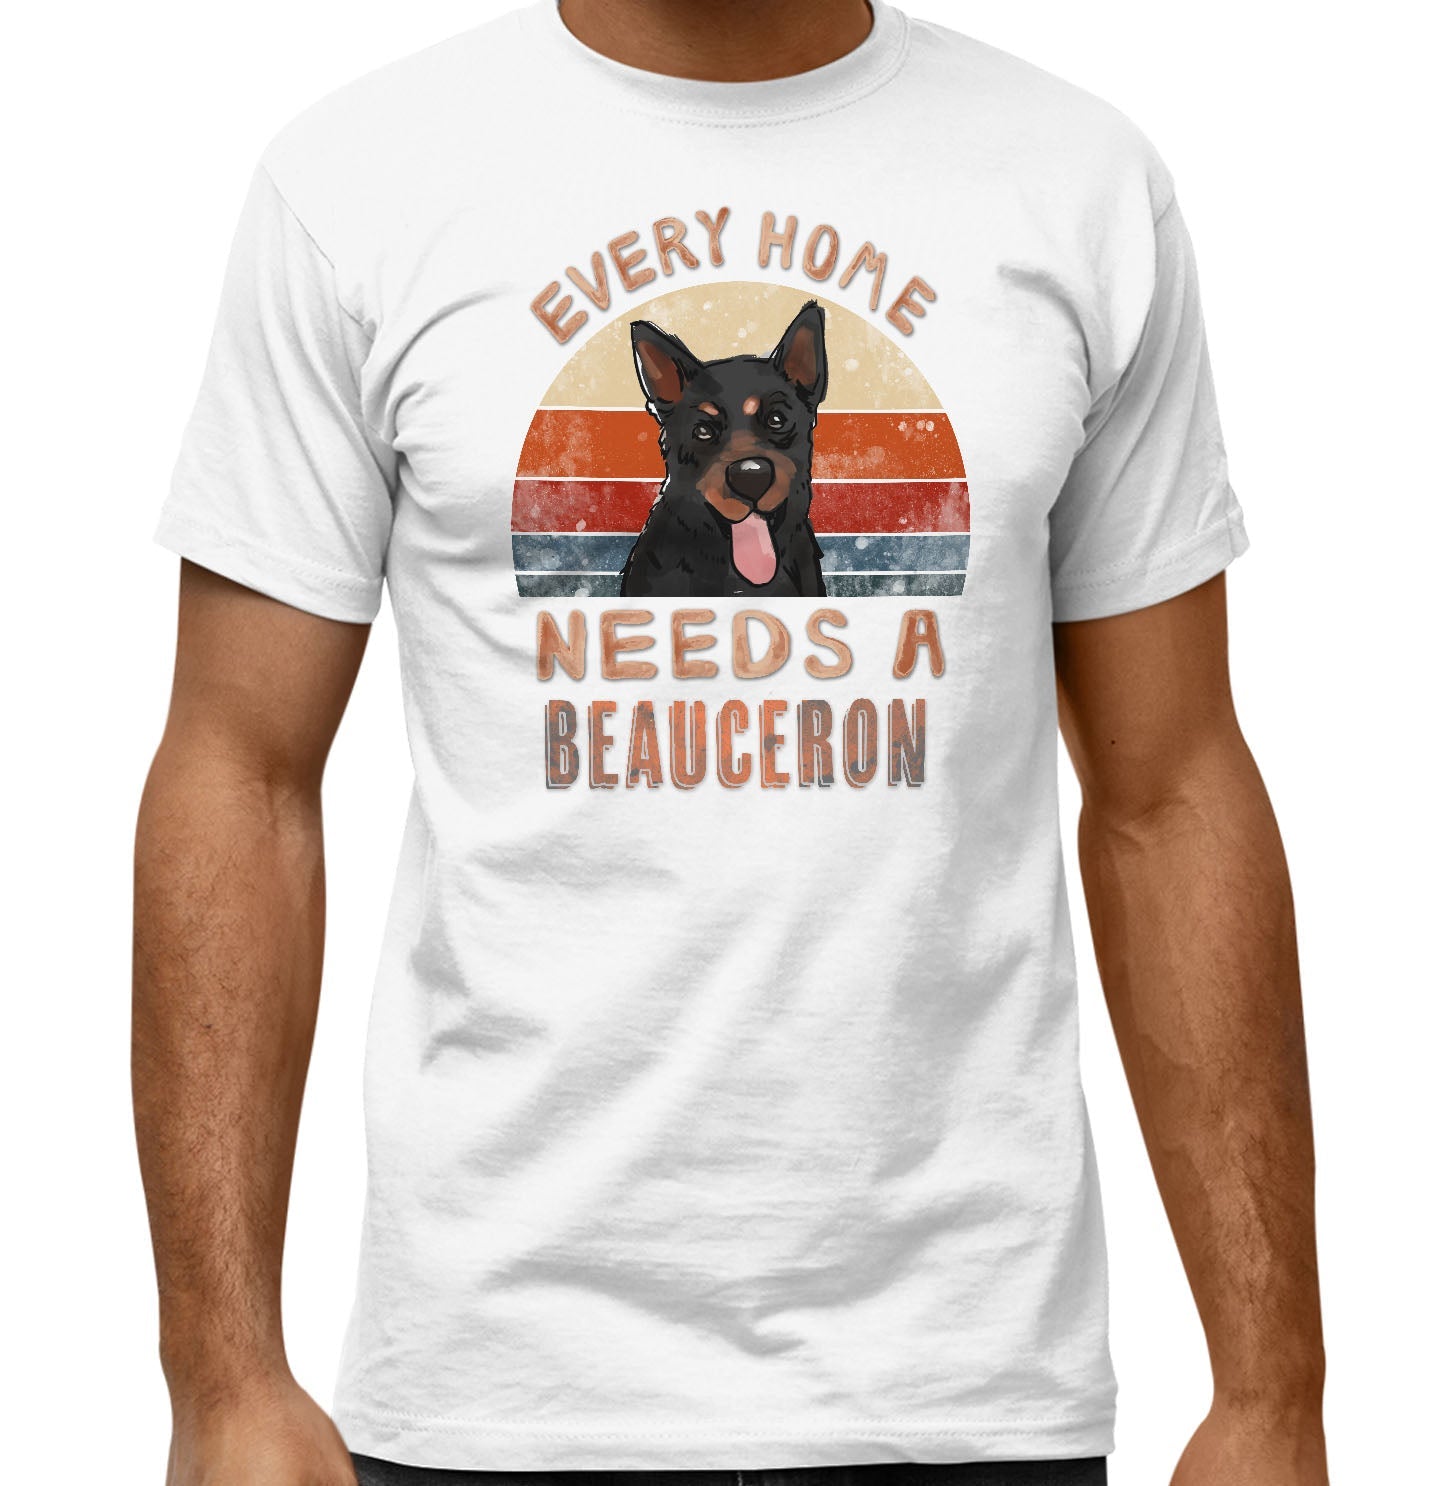 Every Home Needs a Beauceron - Adult Unisex T-Shirt